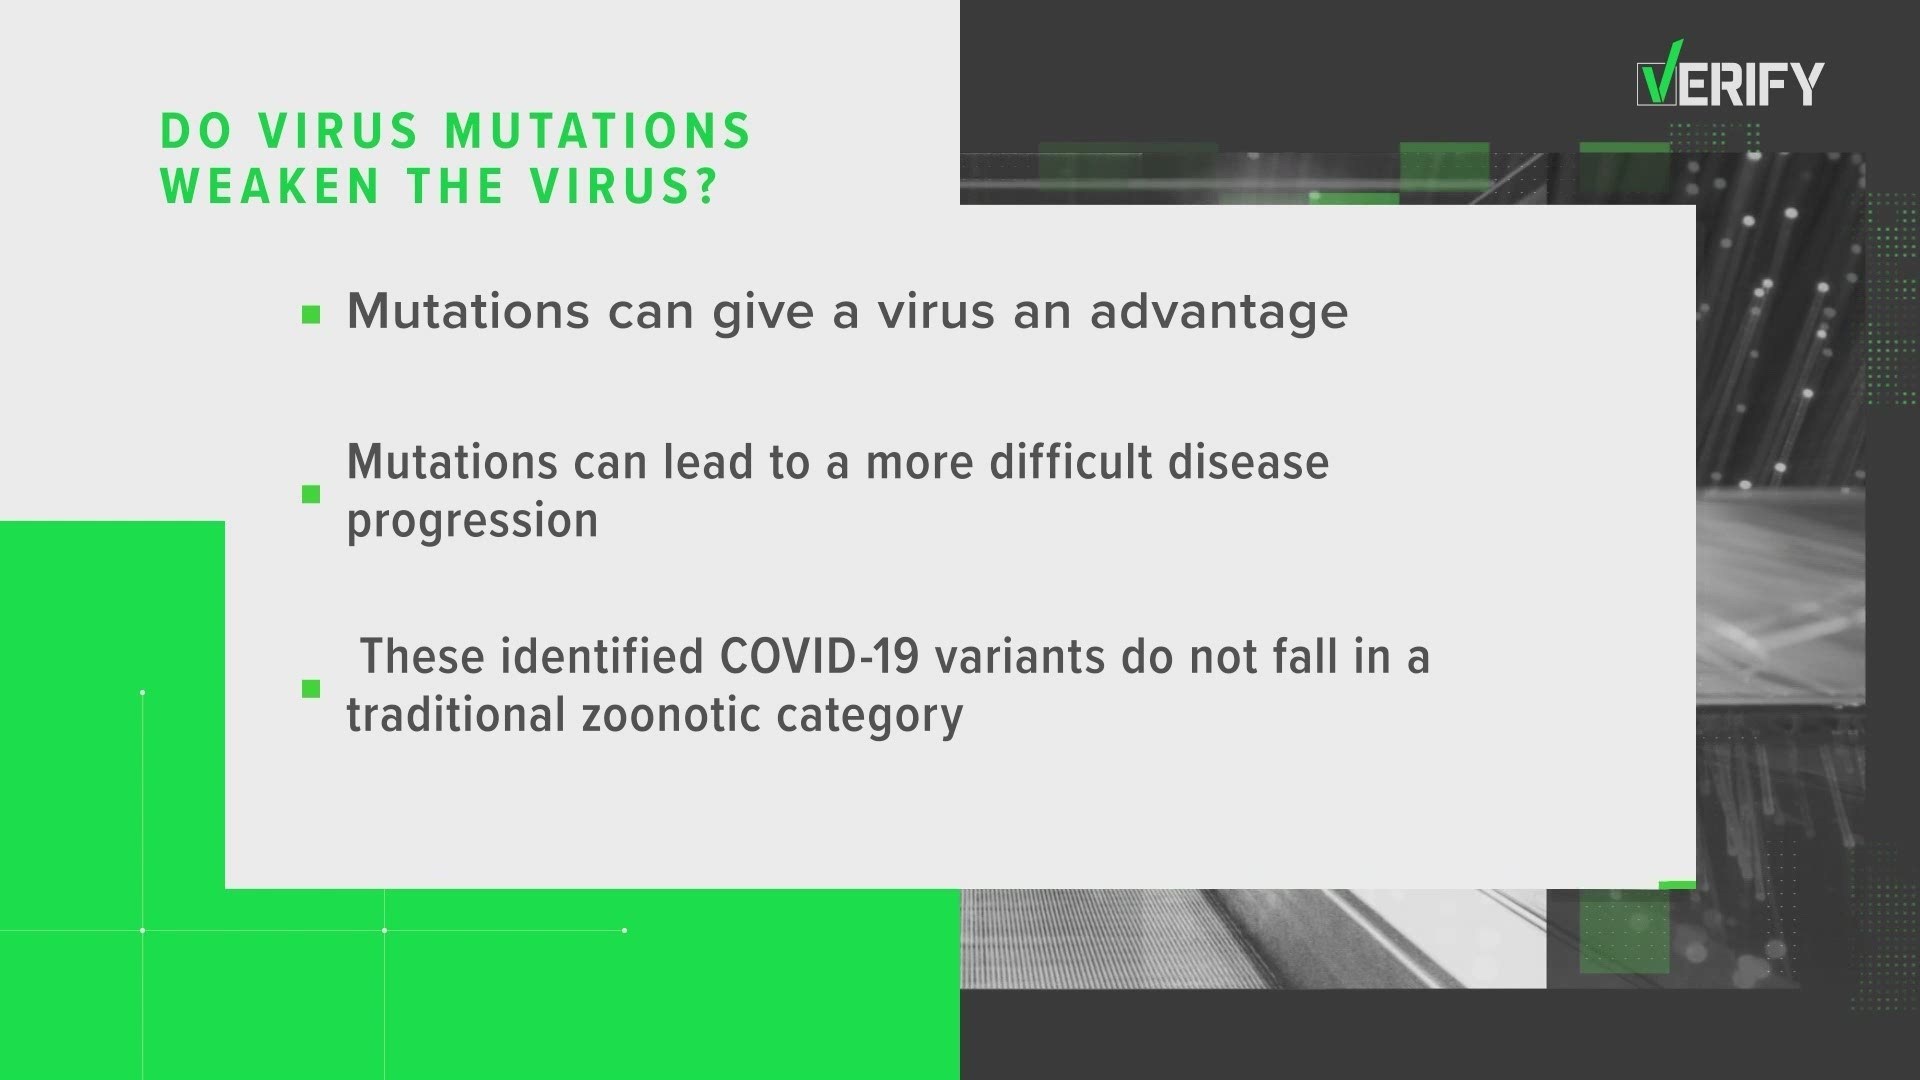 The Centers for Disease Control (CDC) confirms that variants of COVID-19 are spreading across the U.S.